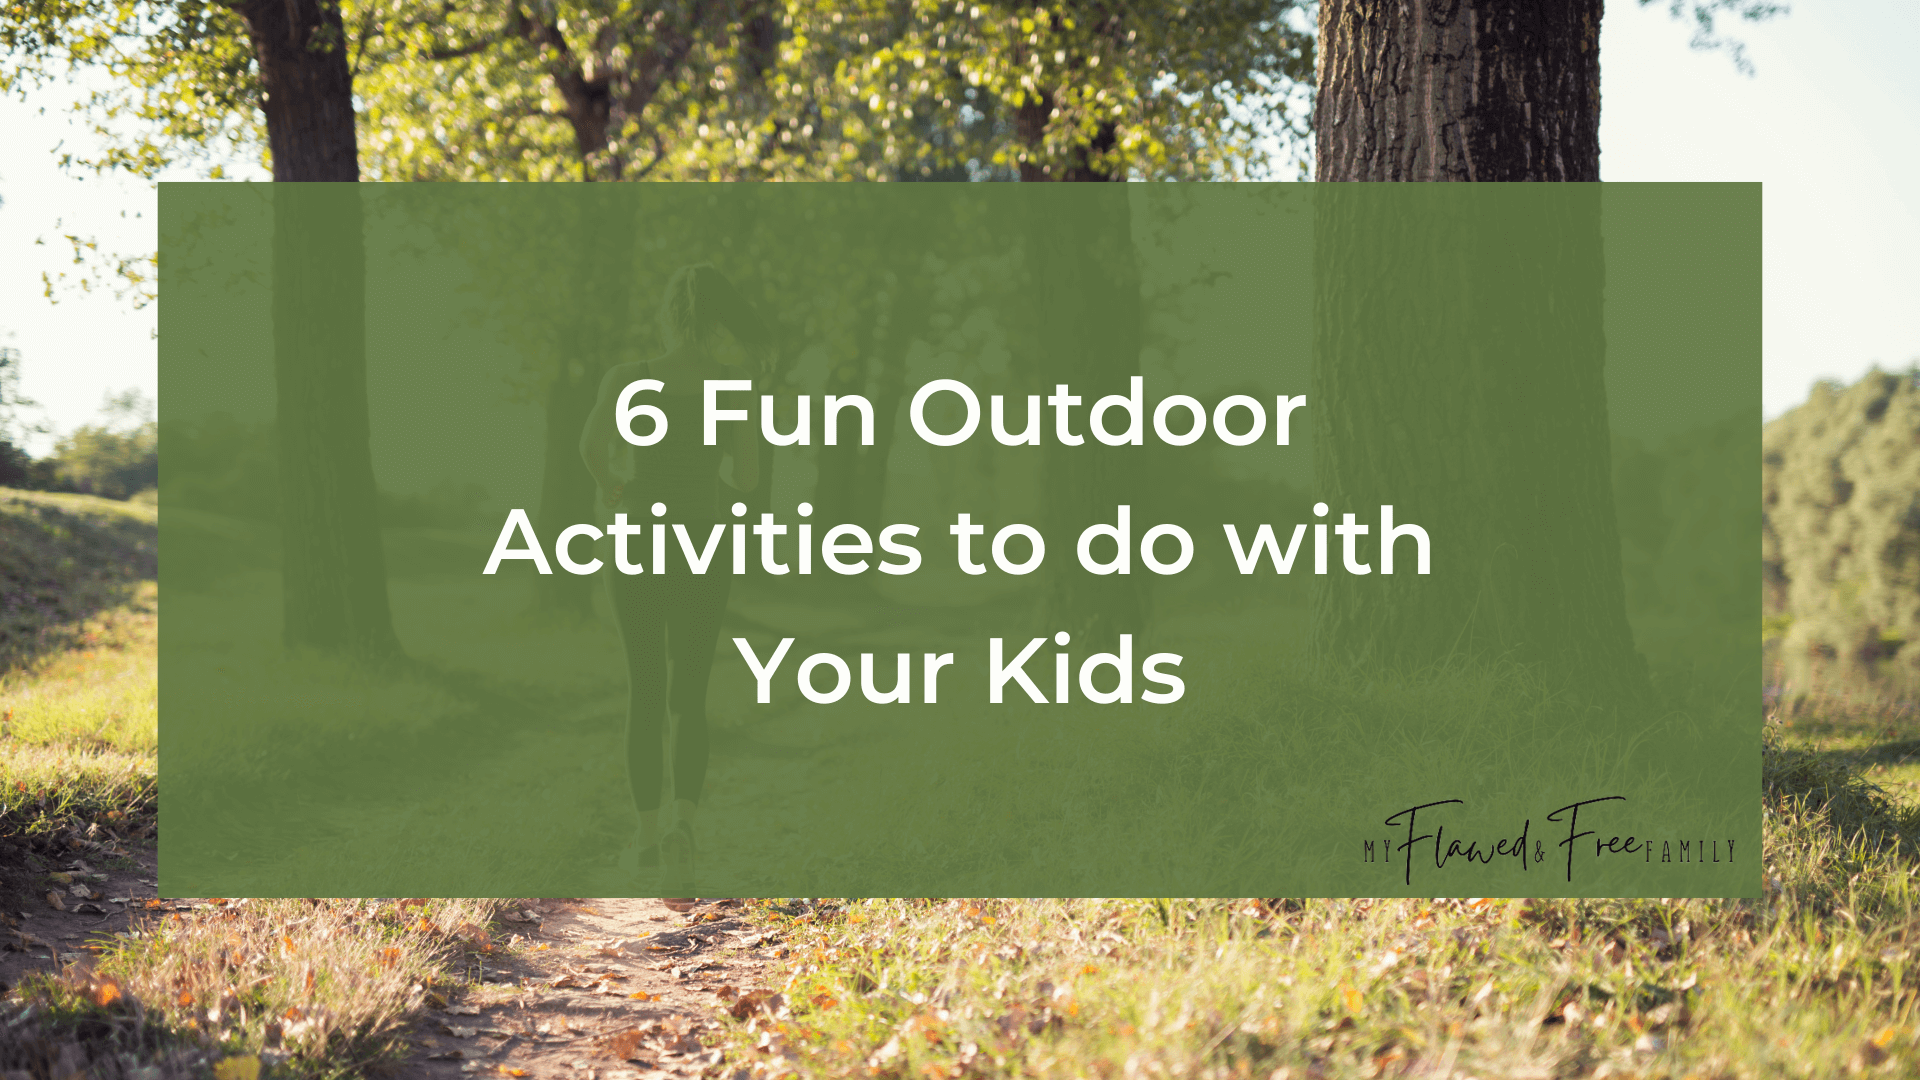 6 Fun Activities to do outdoors with your kids